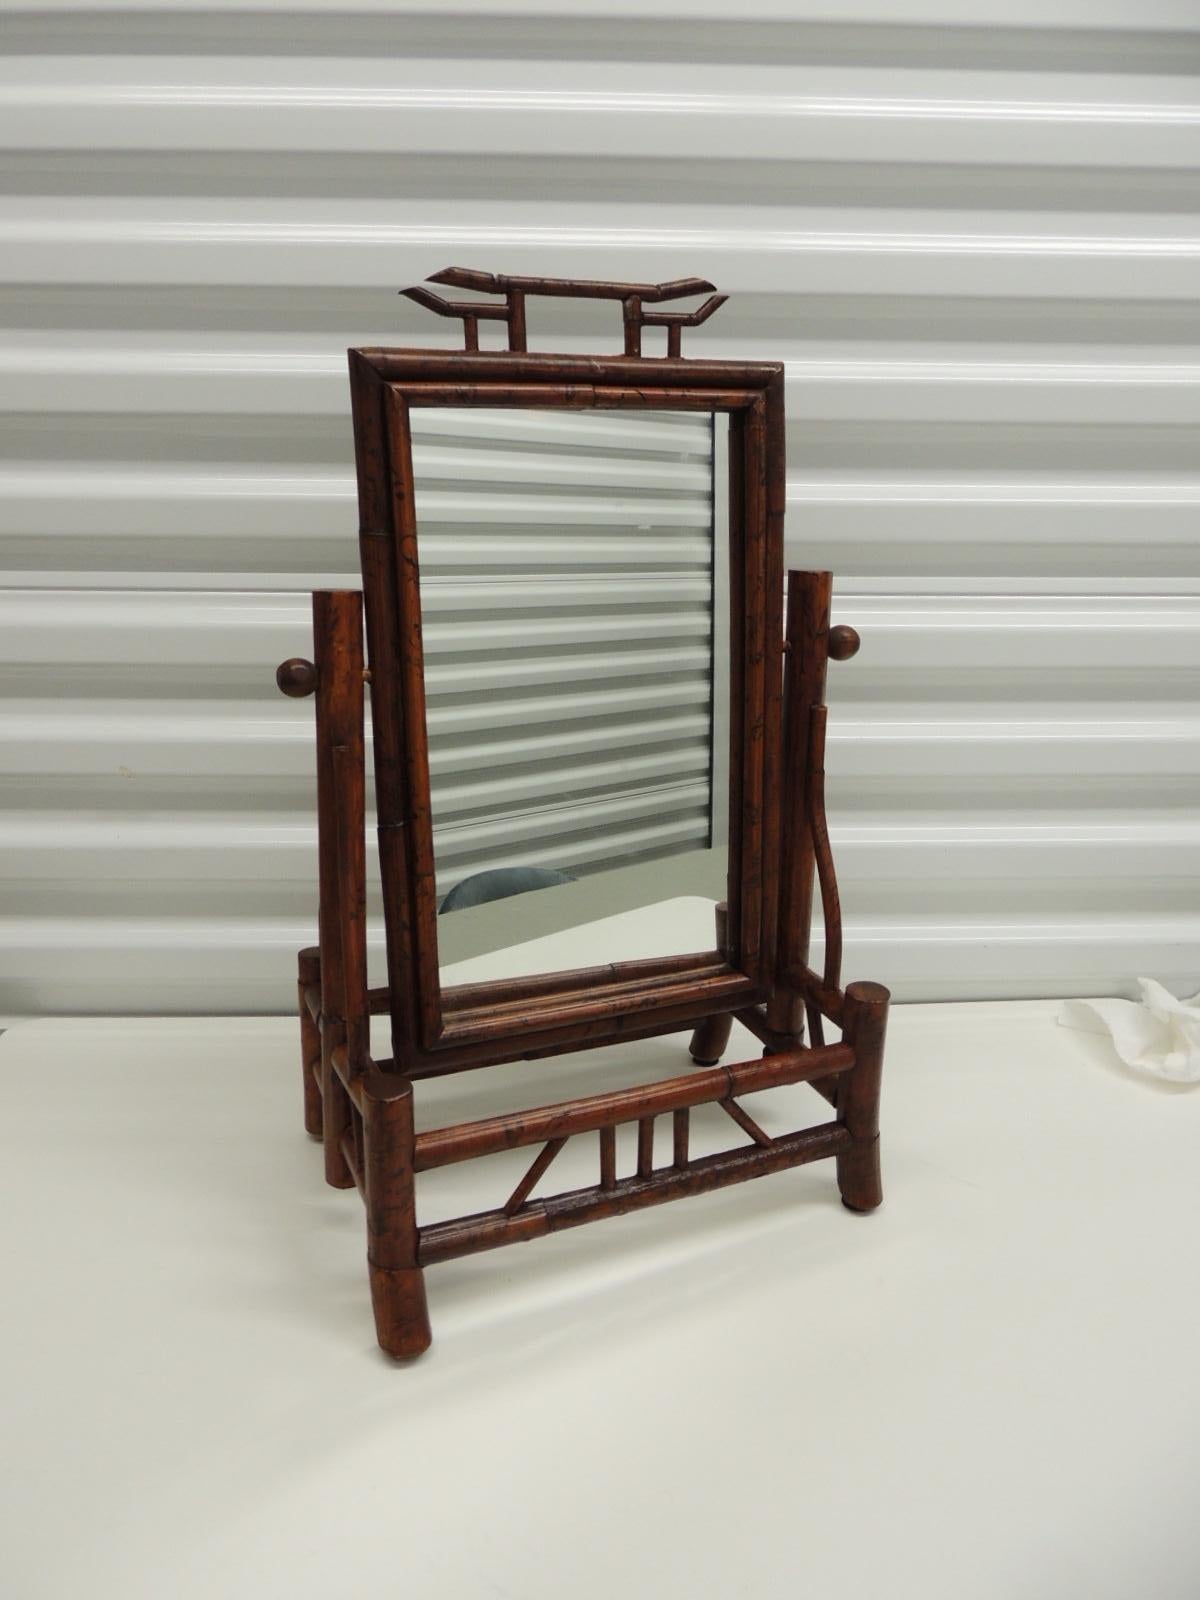 Vintage faux tortoise bamboo vanity table mirror on stand.
Mirror swivels.
Size: 12.5